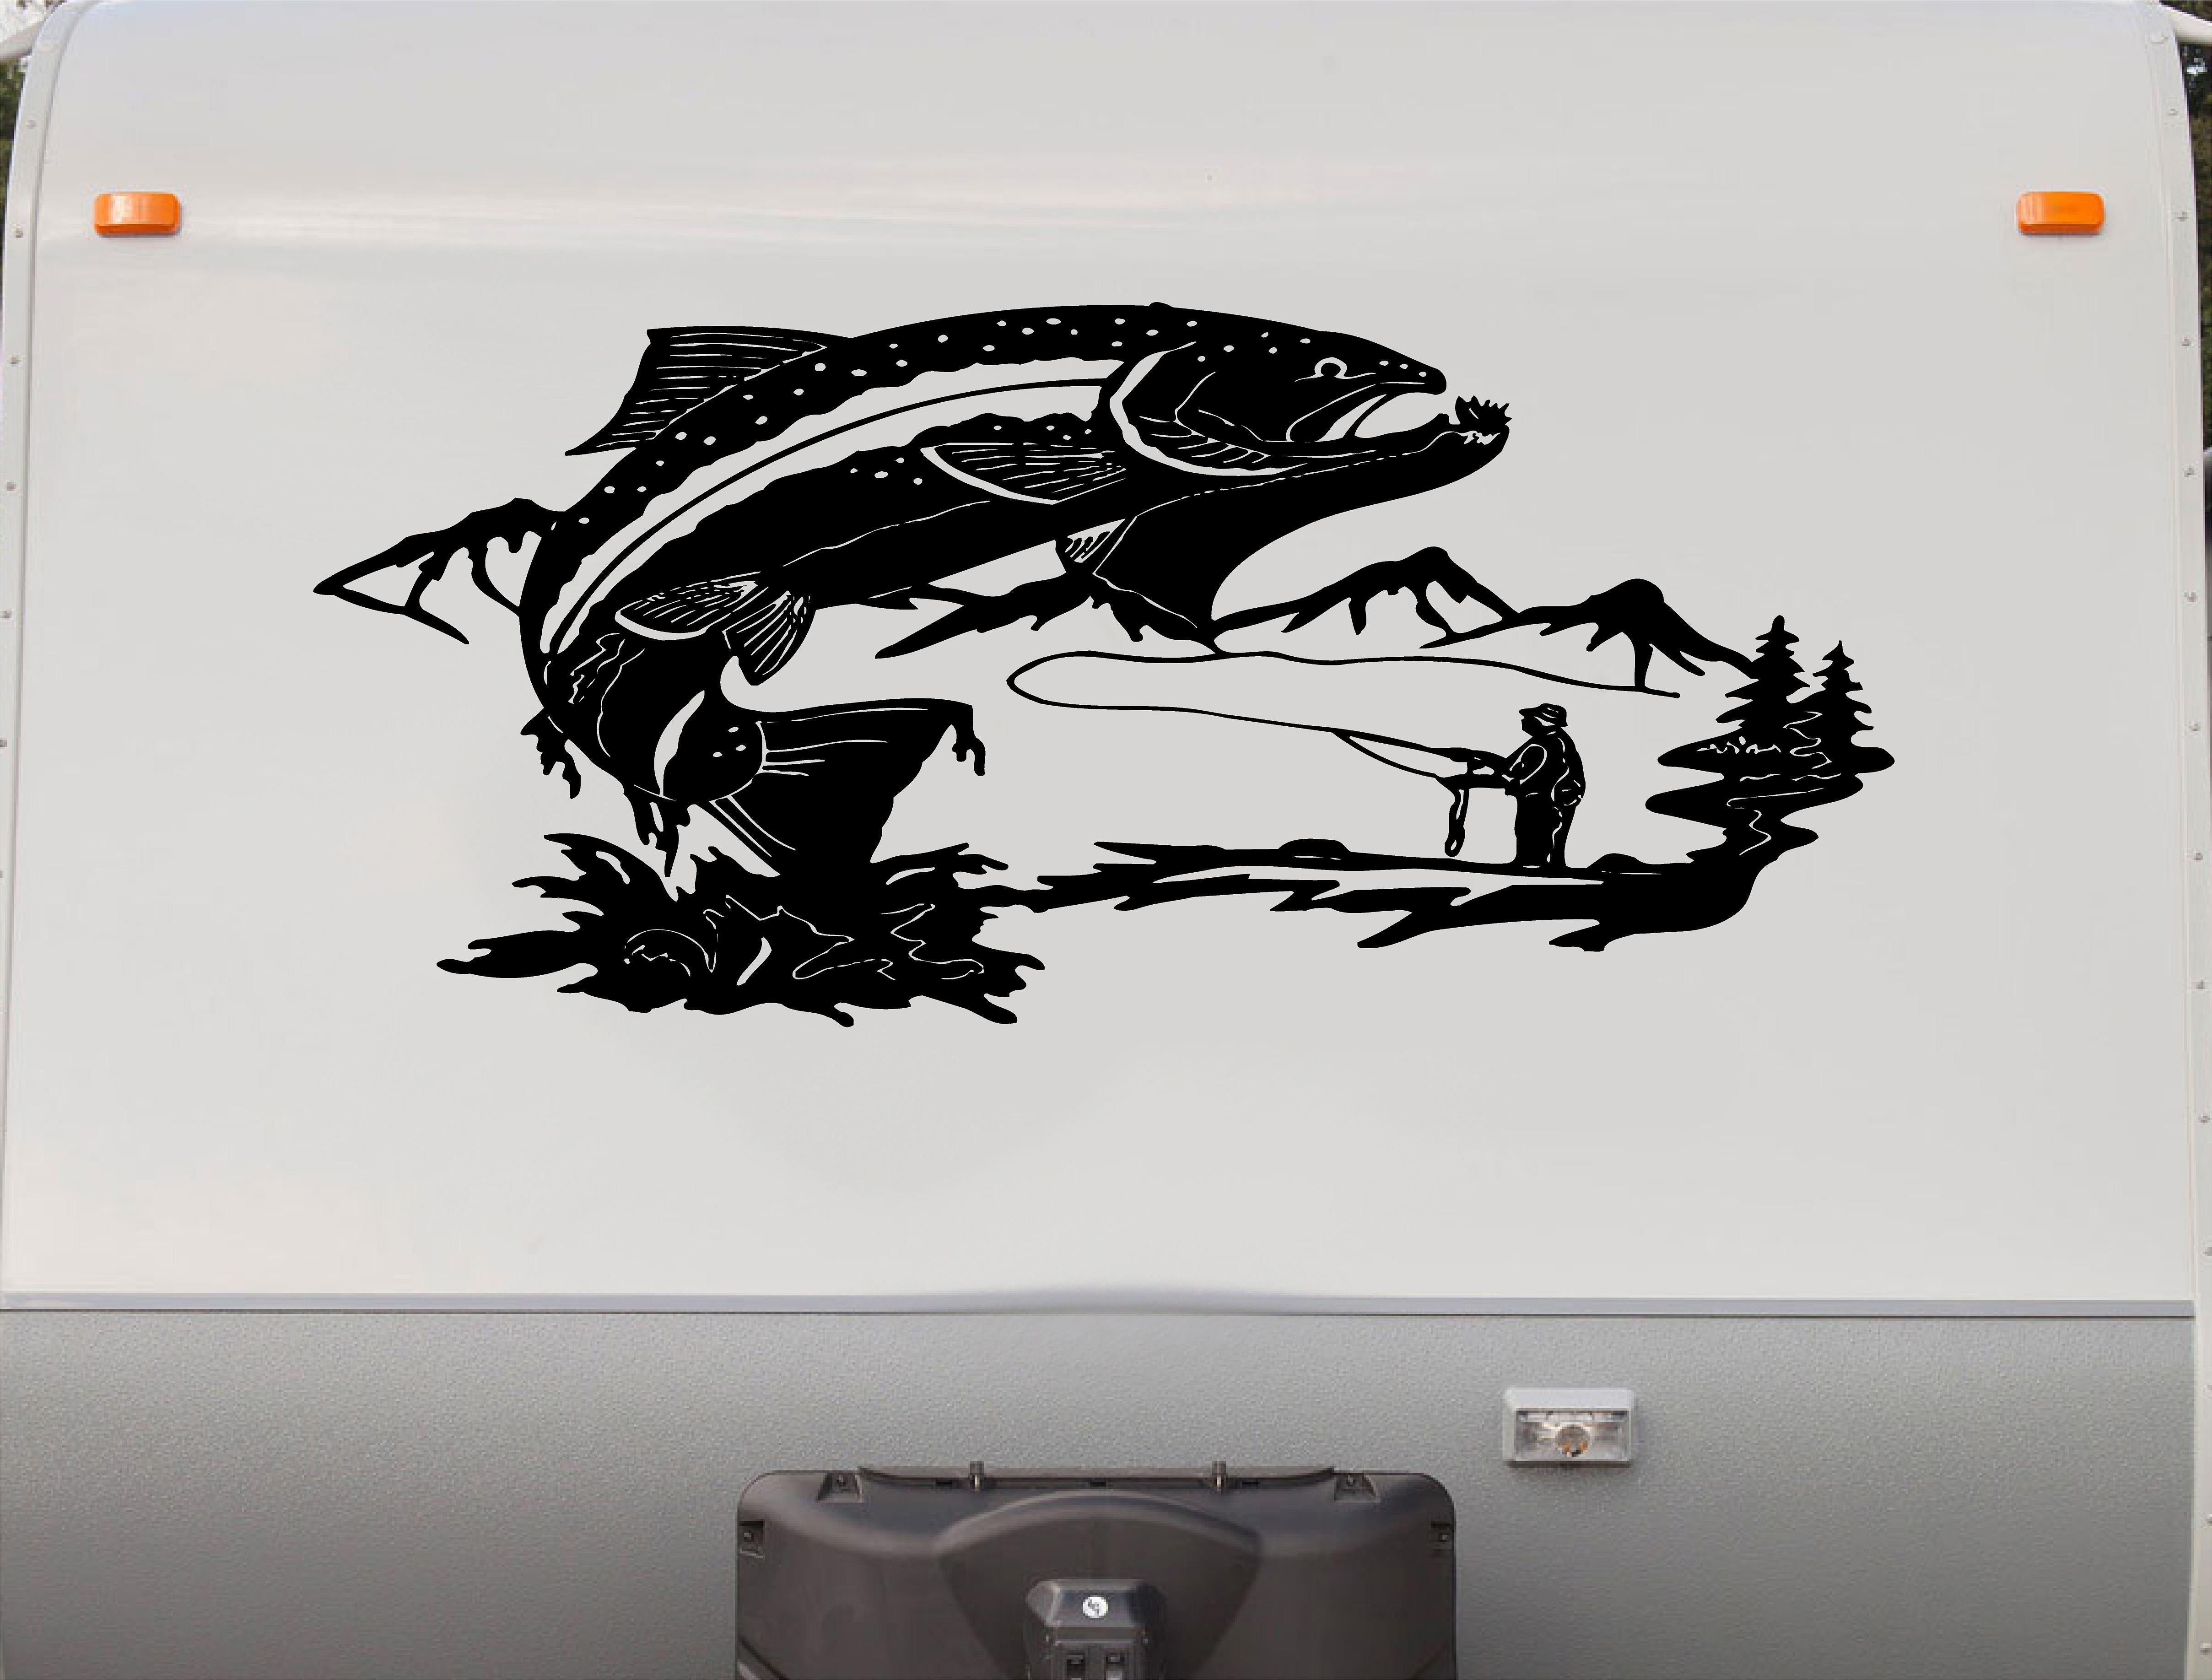 Trout Fishing [3 Pack] of Vinyl Decal Stickers | 5 | Indoor/Outdoor |  Funny decoration for Laptop, Car, Garage , Bedroom, Offices | SignMission